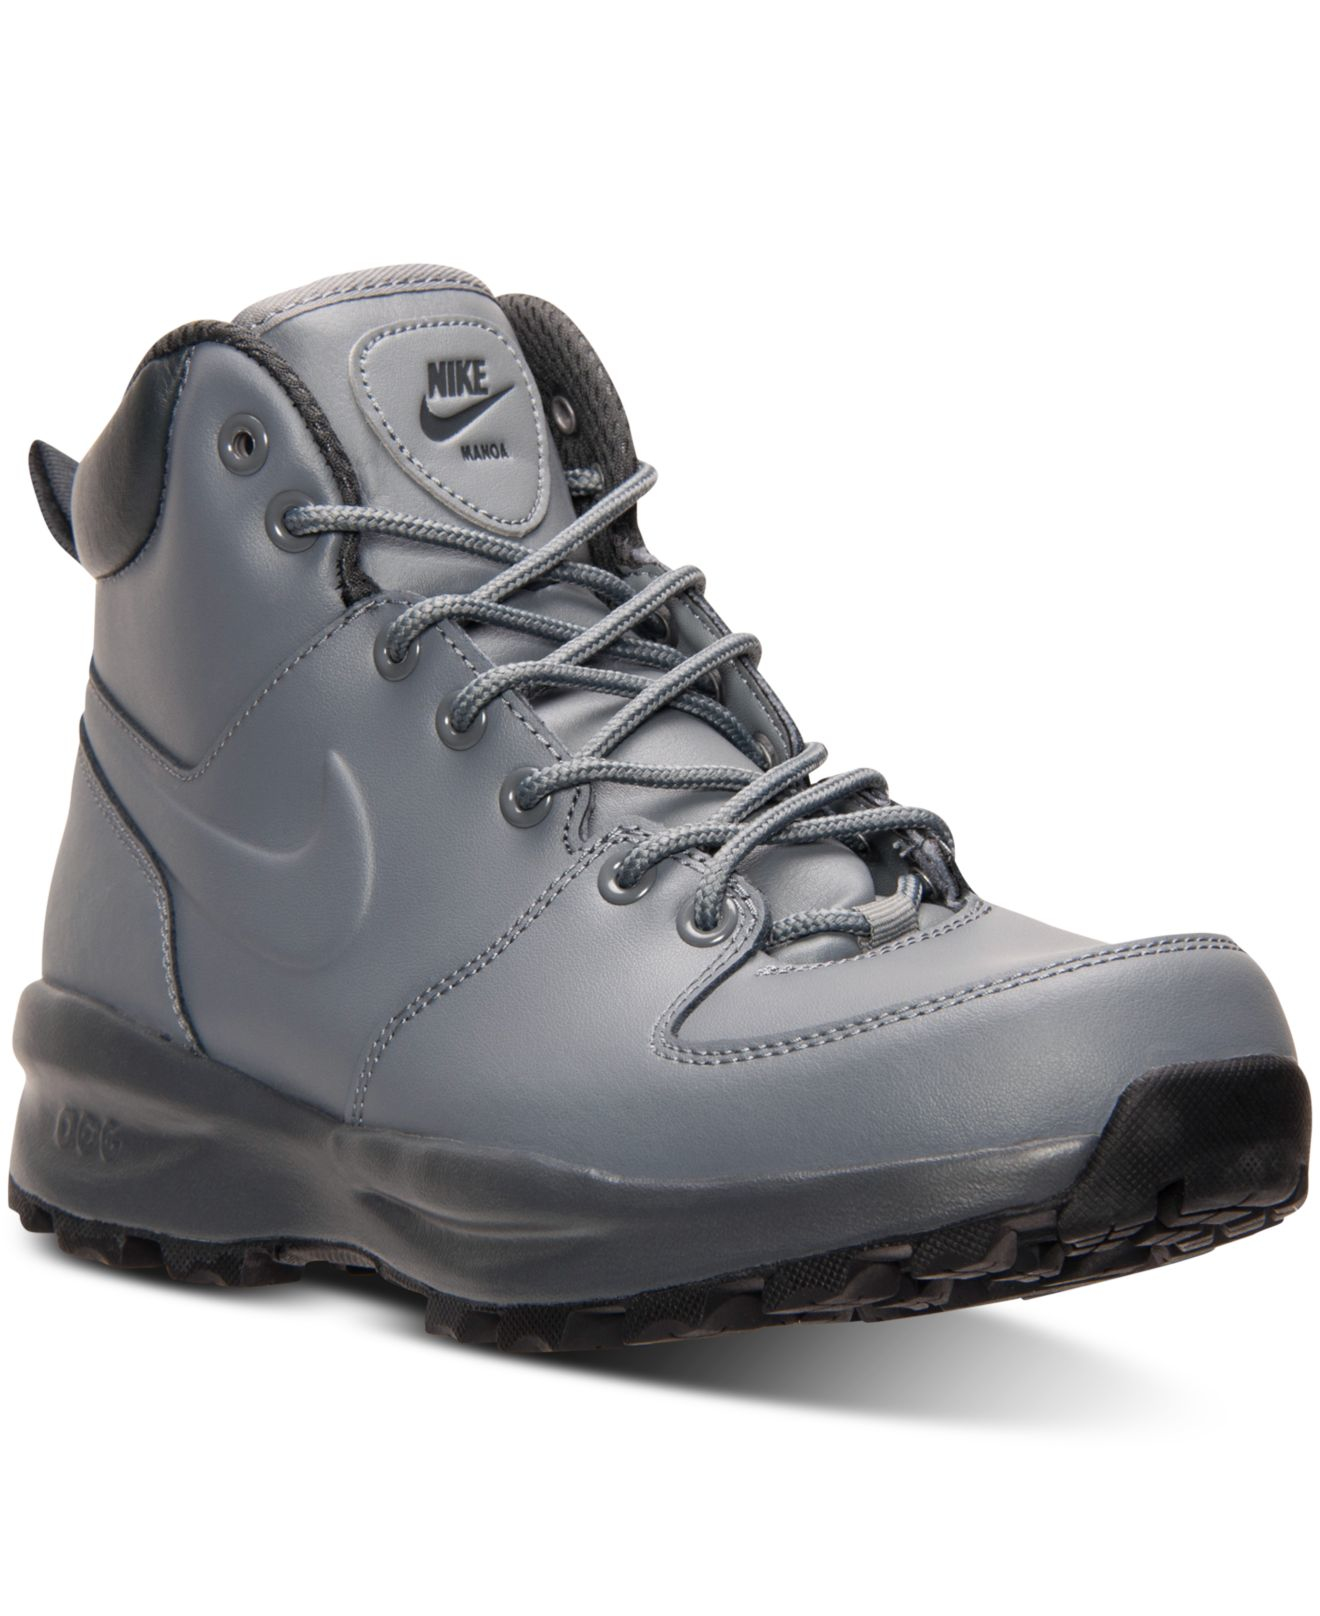 nike boots gray